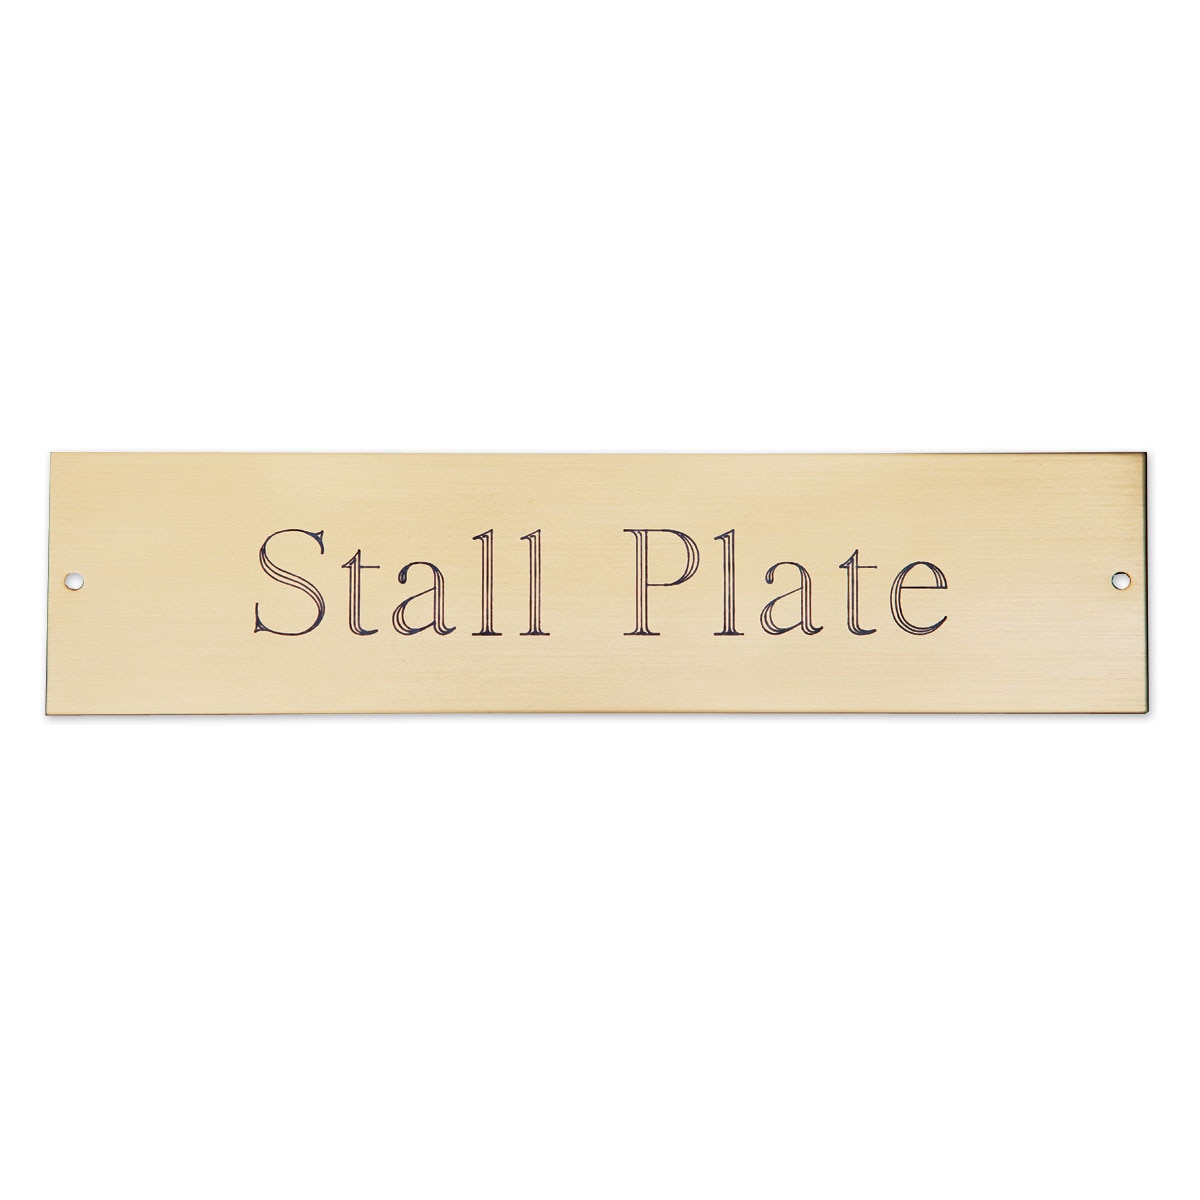 Engraved Plates 3 sizes adhesive or screw fittings Solid Brass Plaques